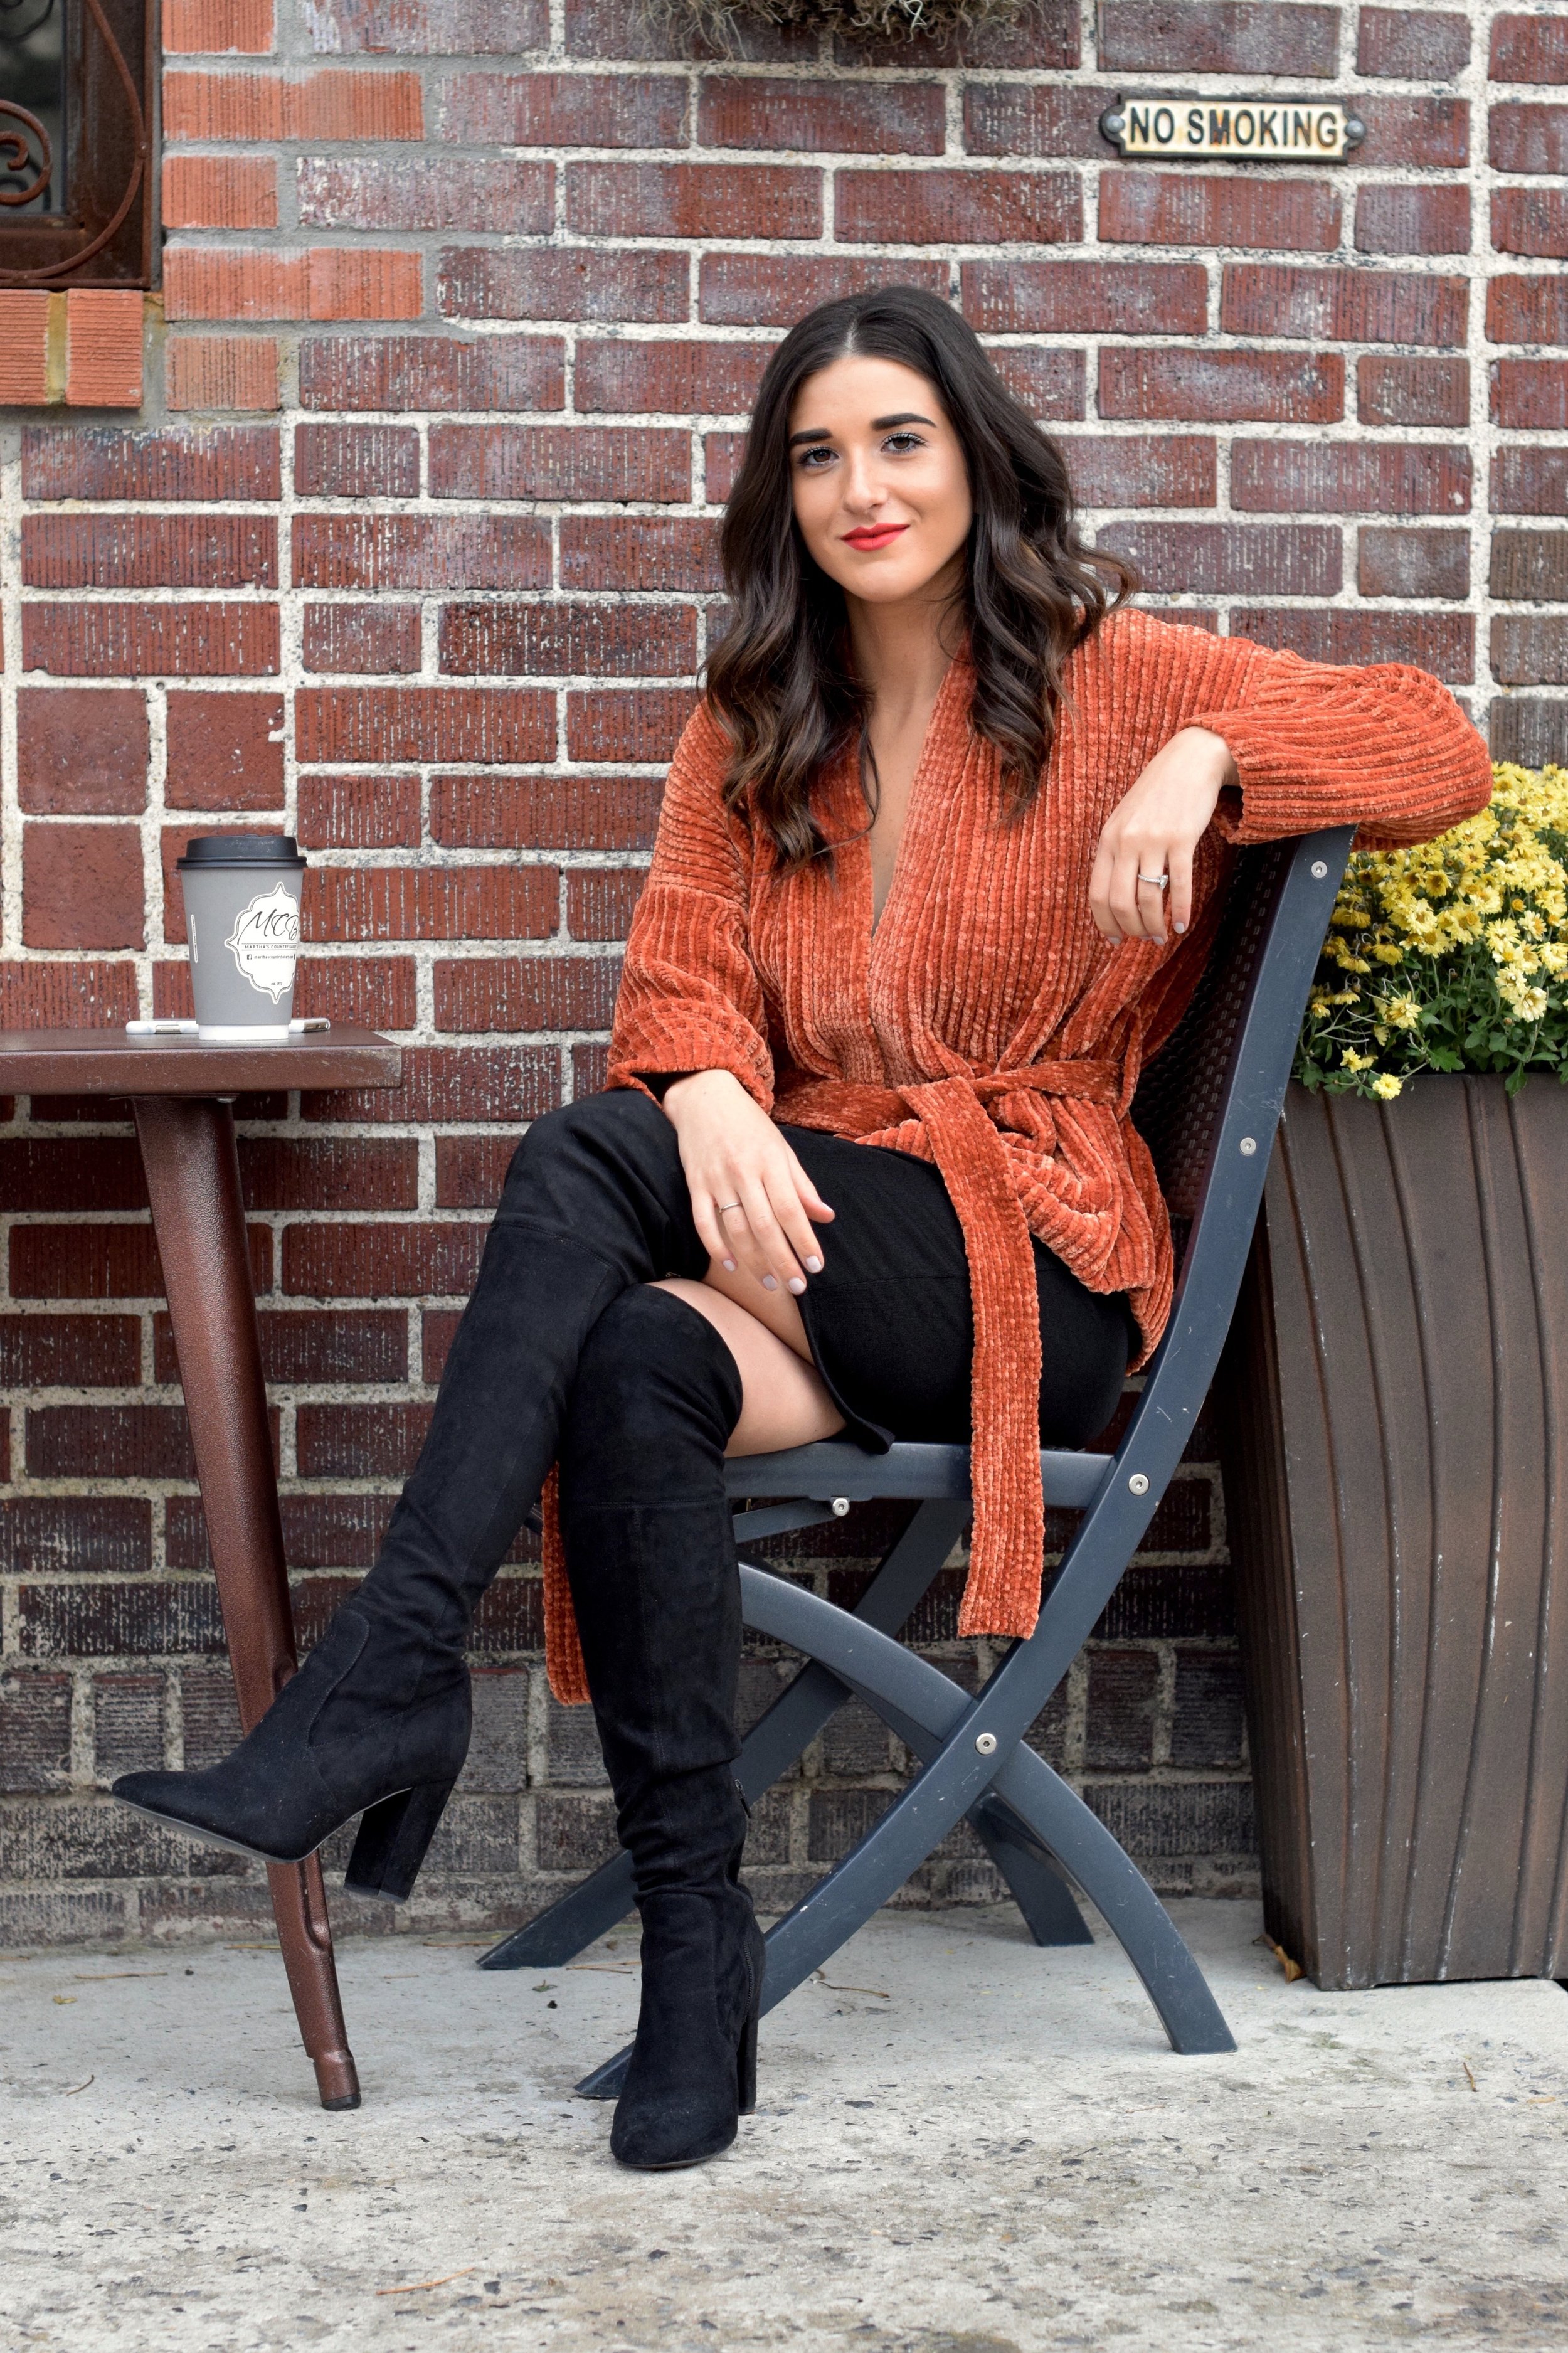 Orange Tie Sweater OTK Boots 10 Sweaters That Make The Perfect Holiday Gifts Esther Santer Fashion Blog NYC Street Style Blogger Outfit OOTD Trendy Urban Outfitters Girl Women Black Over The Knee Boots Slip Dress Beautiful New York City Cozy  OOTD.jpg